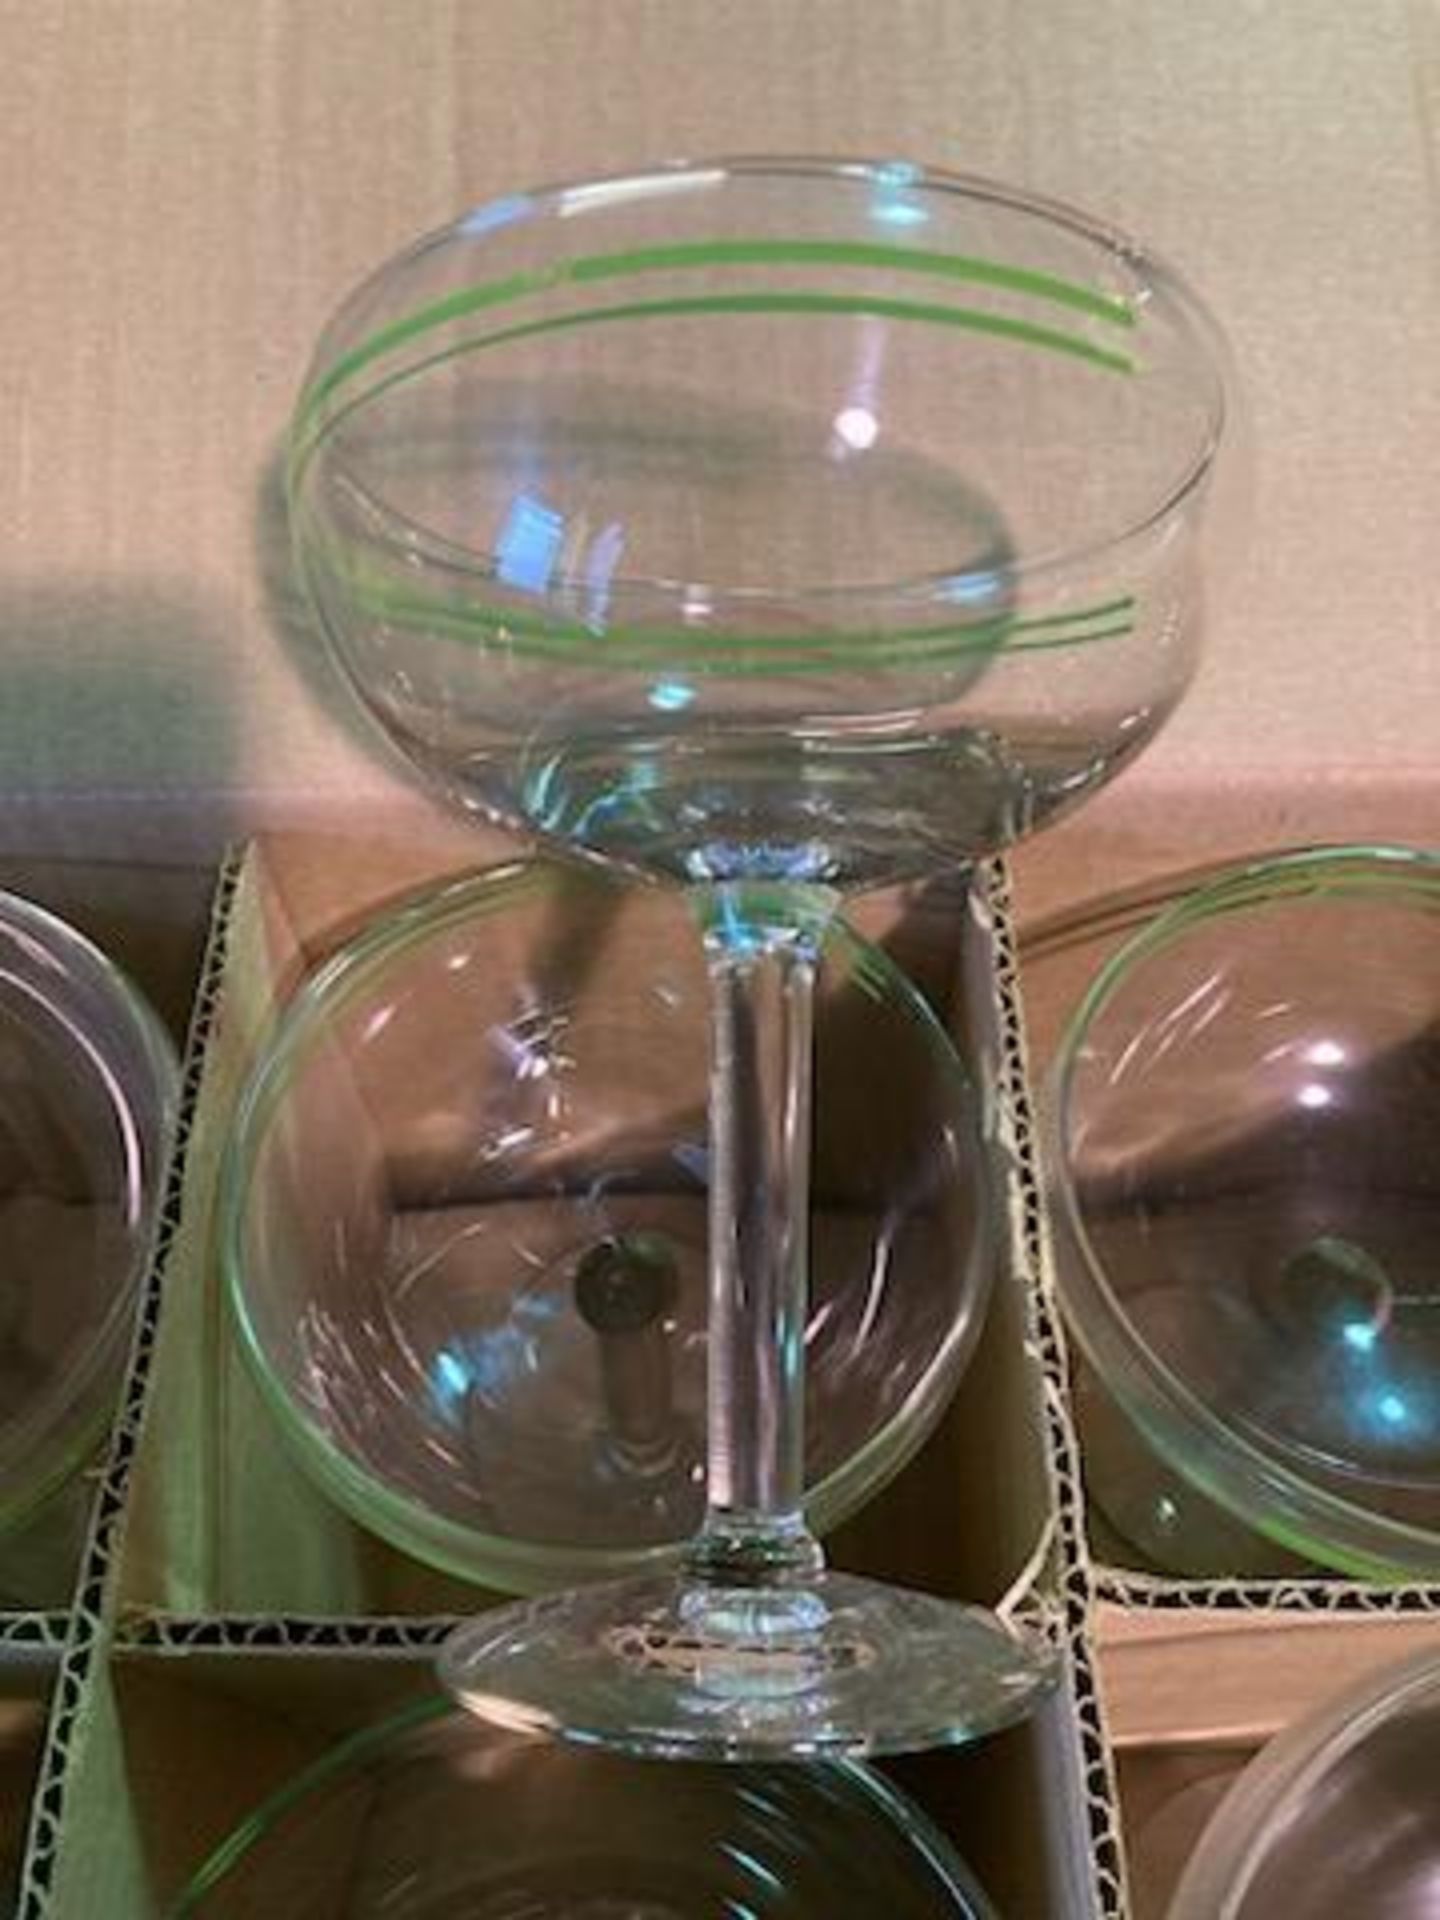 Pallet of (New) Margarita Glass (Location: 279 Burrows St., Rochester, NY 14606)